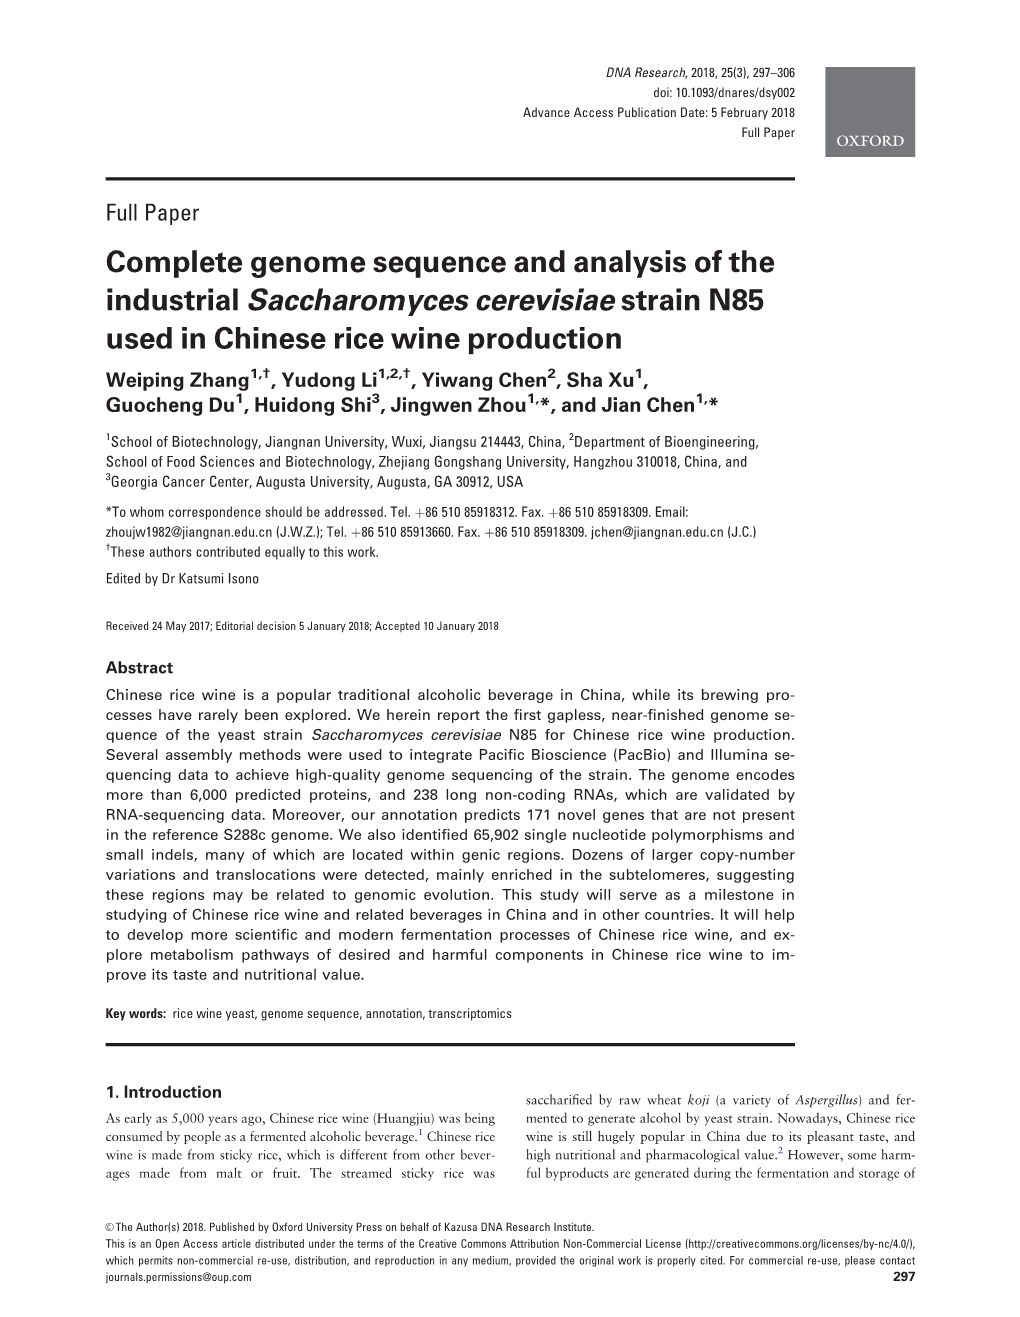 Complete Genome Sequence and Analysis of the Industrial